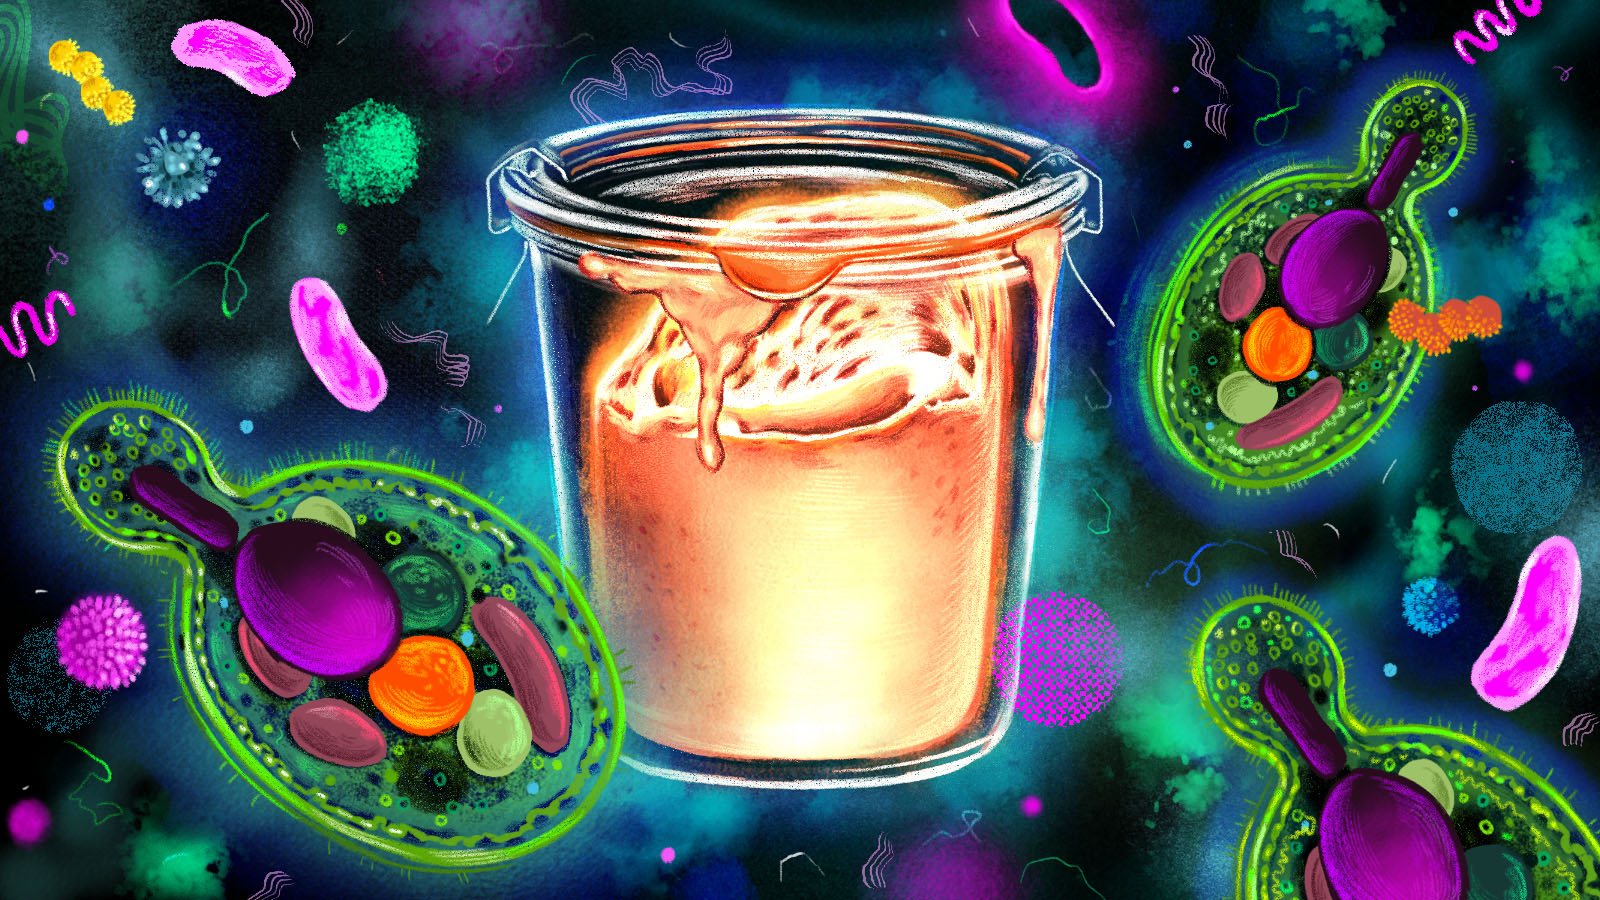 A glass jar of sourdough starter, surrounded by glowing, multicolored microbes. Illustration.